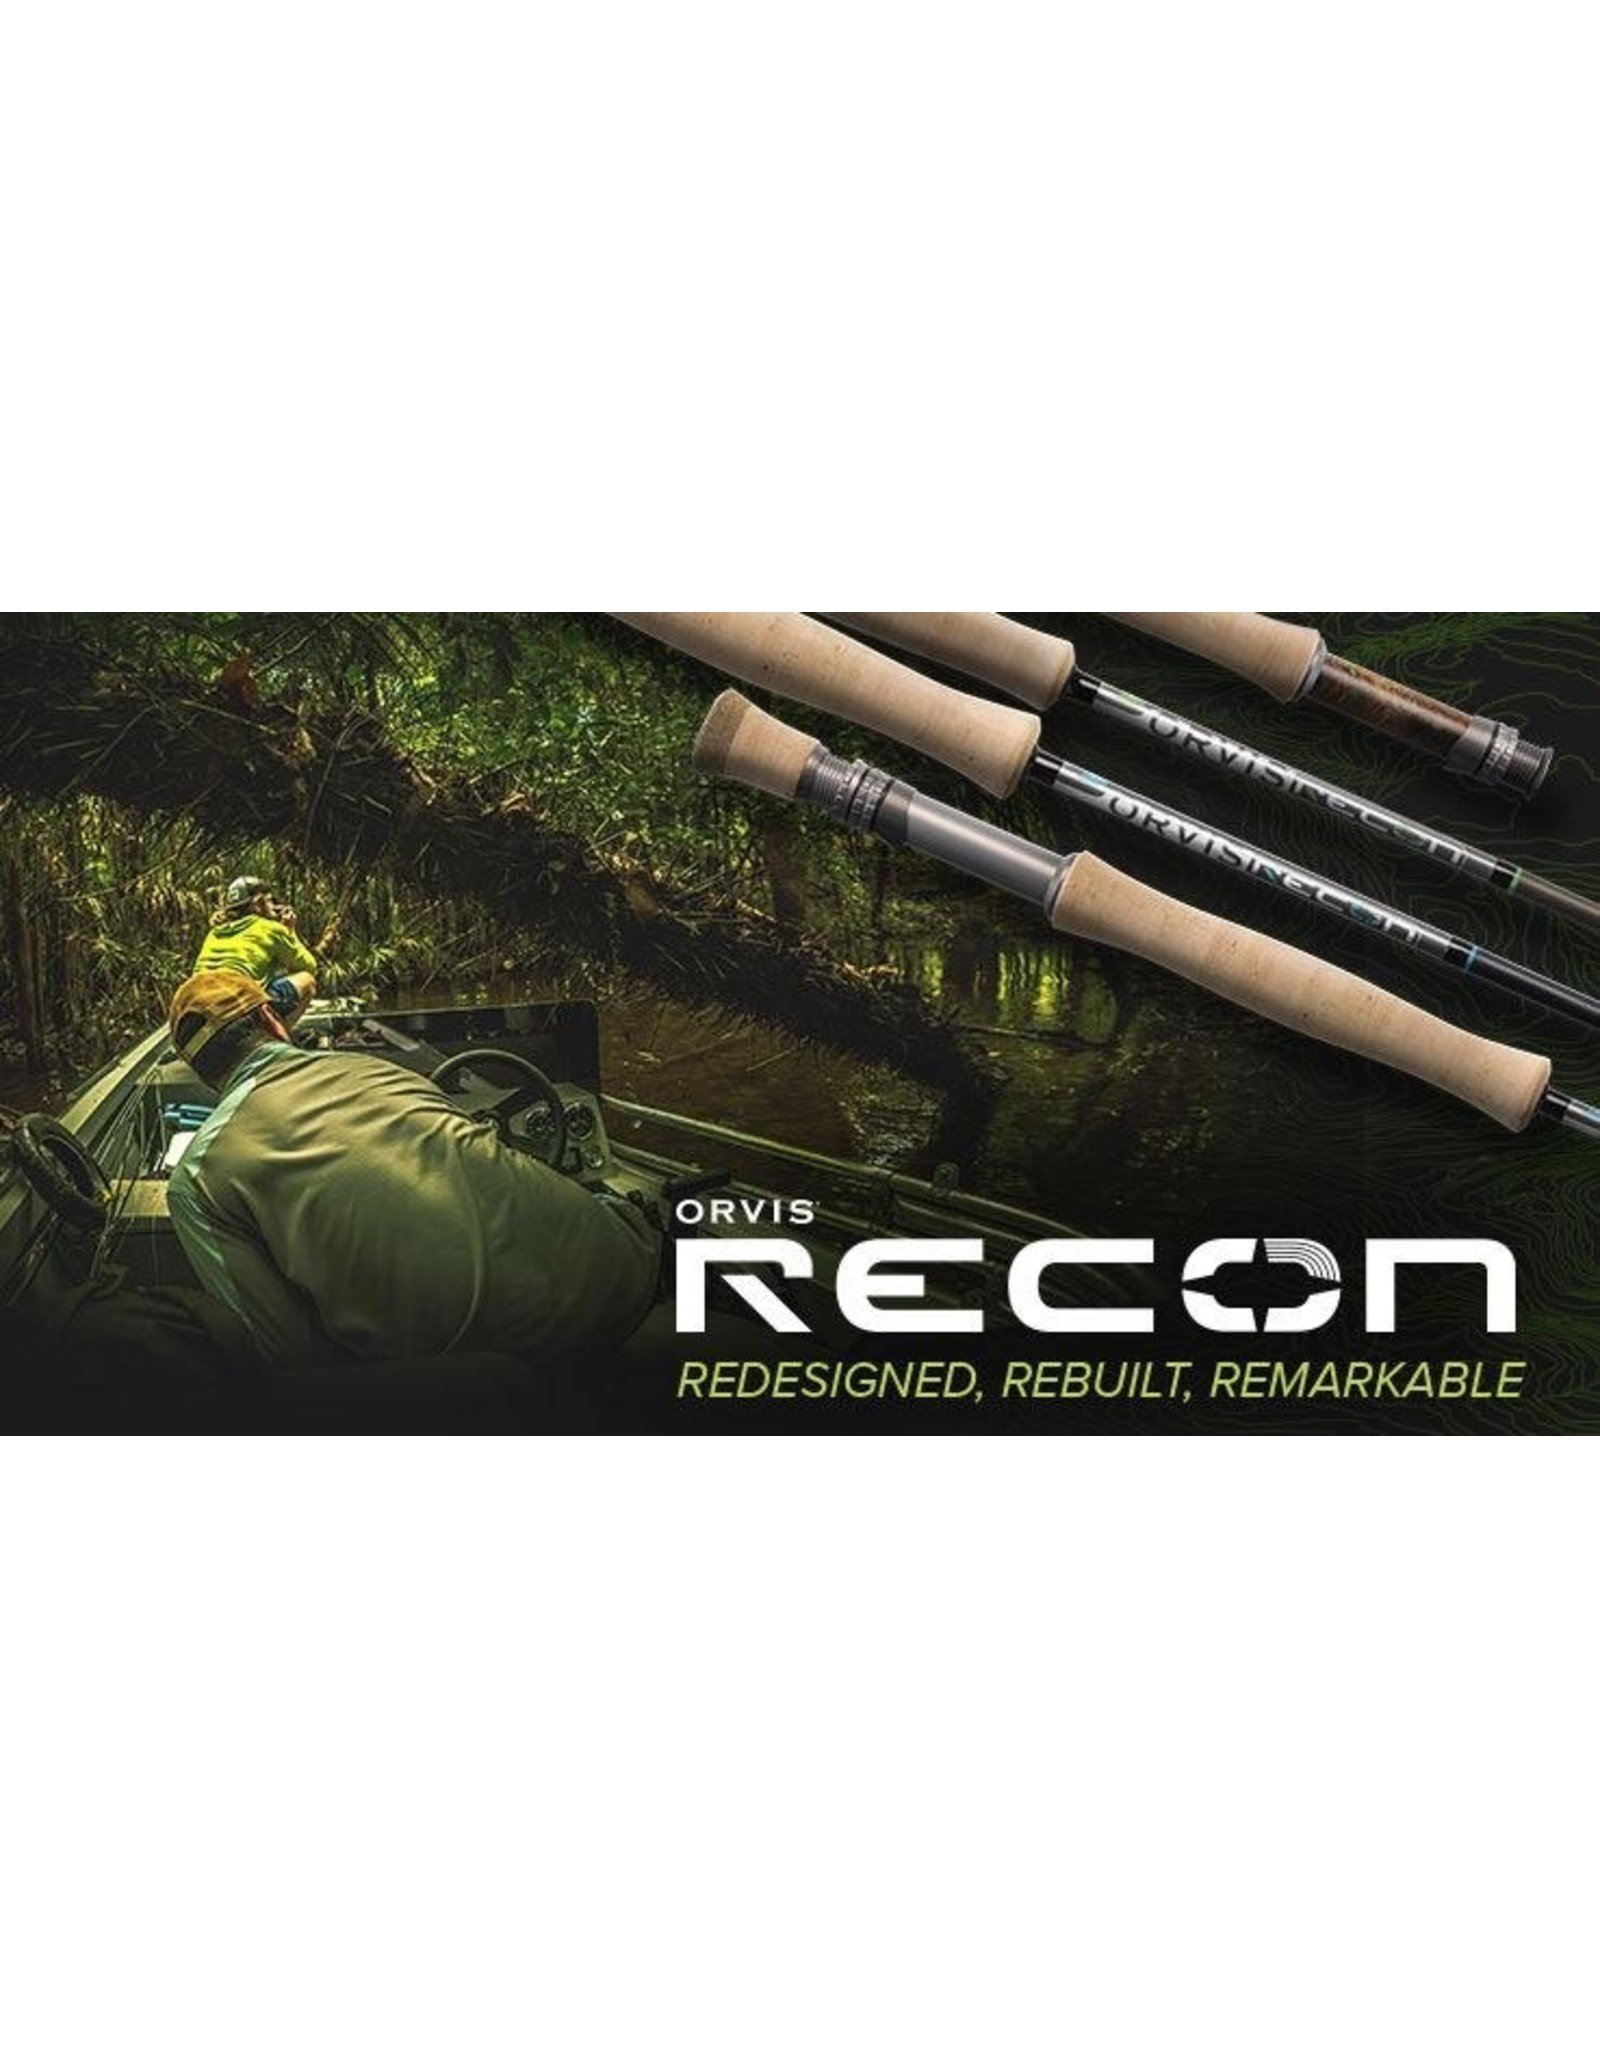 Orvis Recon 10ft 3wt Review - Fly Fishing